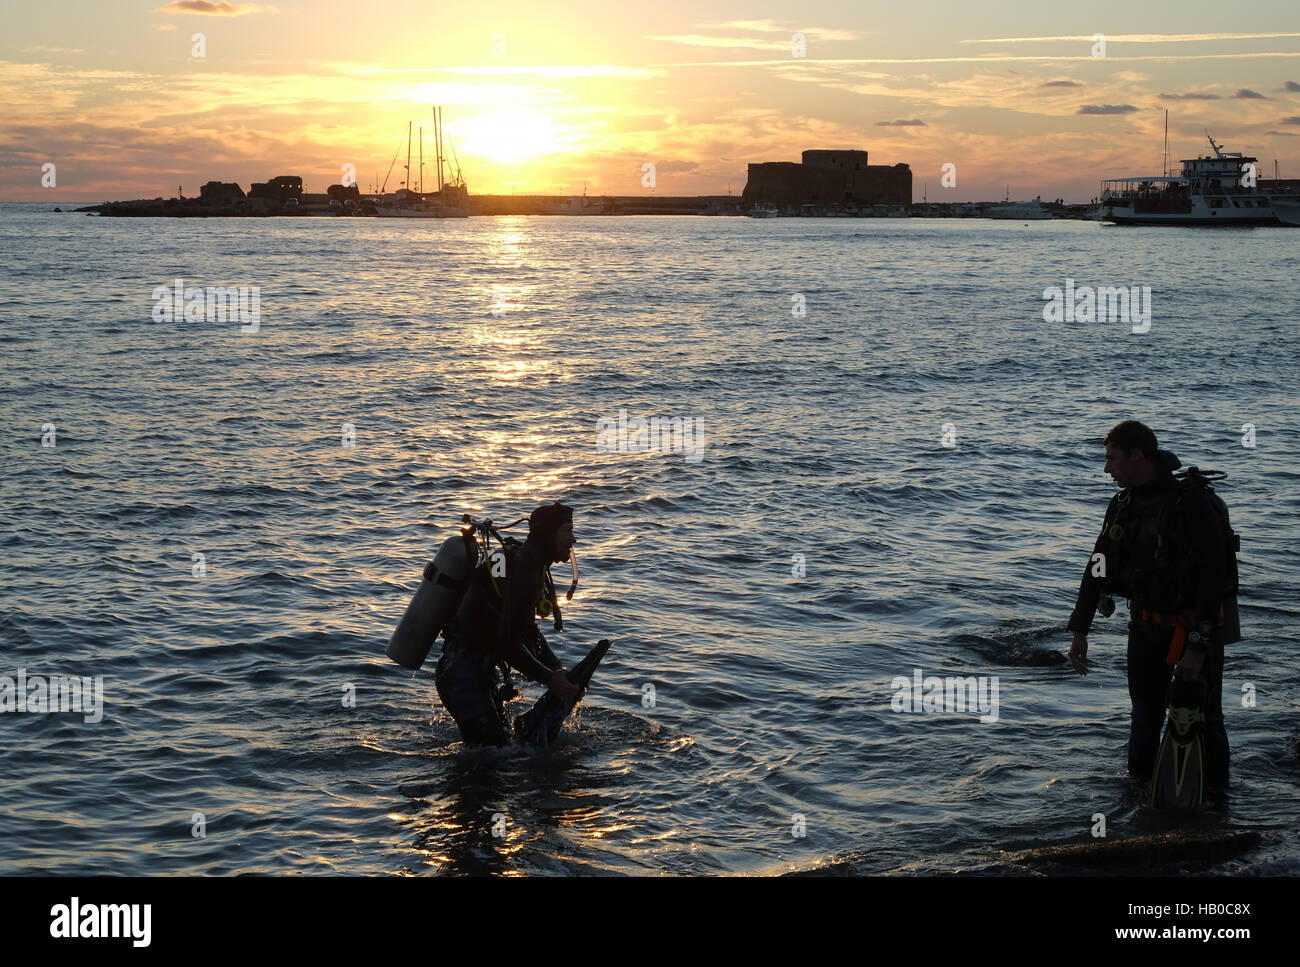 Cydive diving instructor and pupil leave the water at sunset after a diving session on the waterfront in Paphos Harbour. Stock Photo